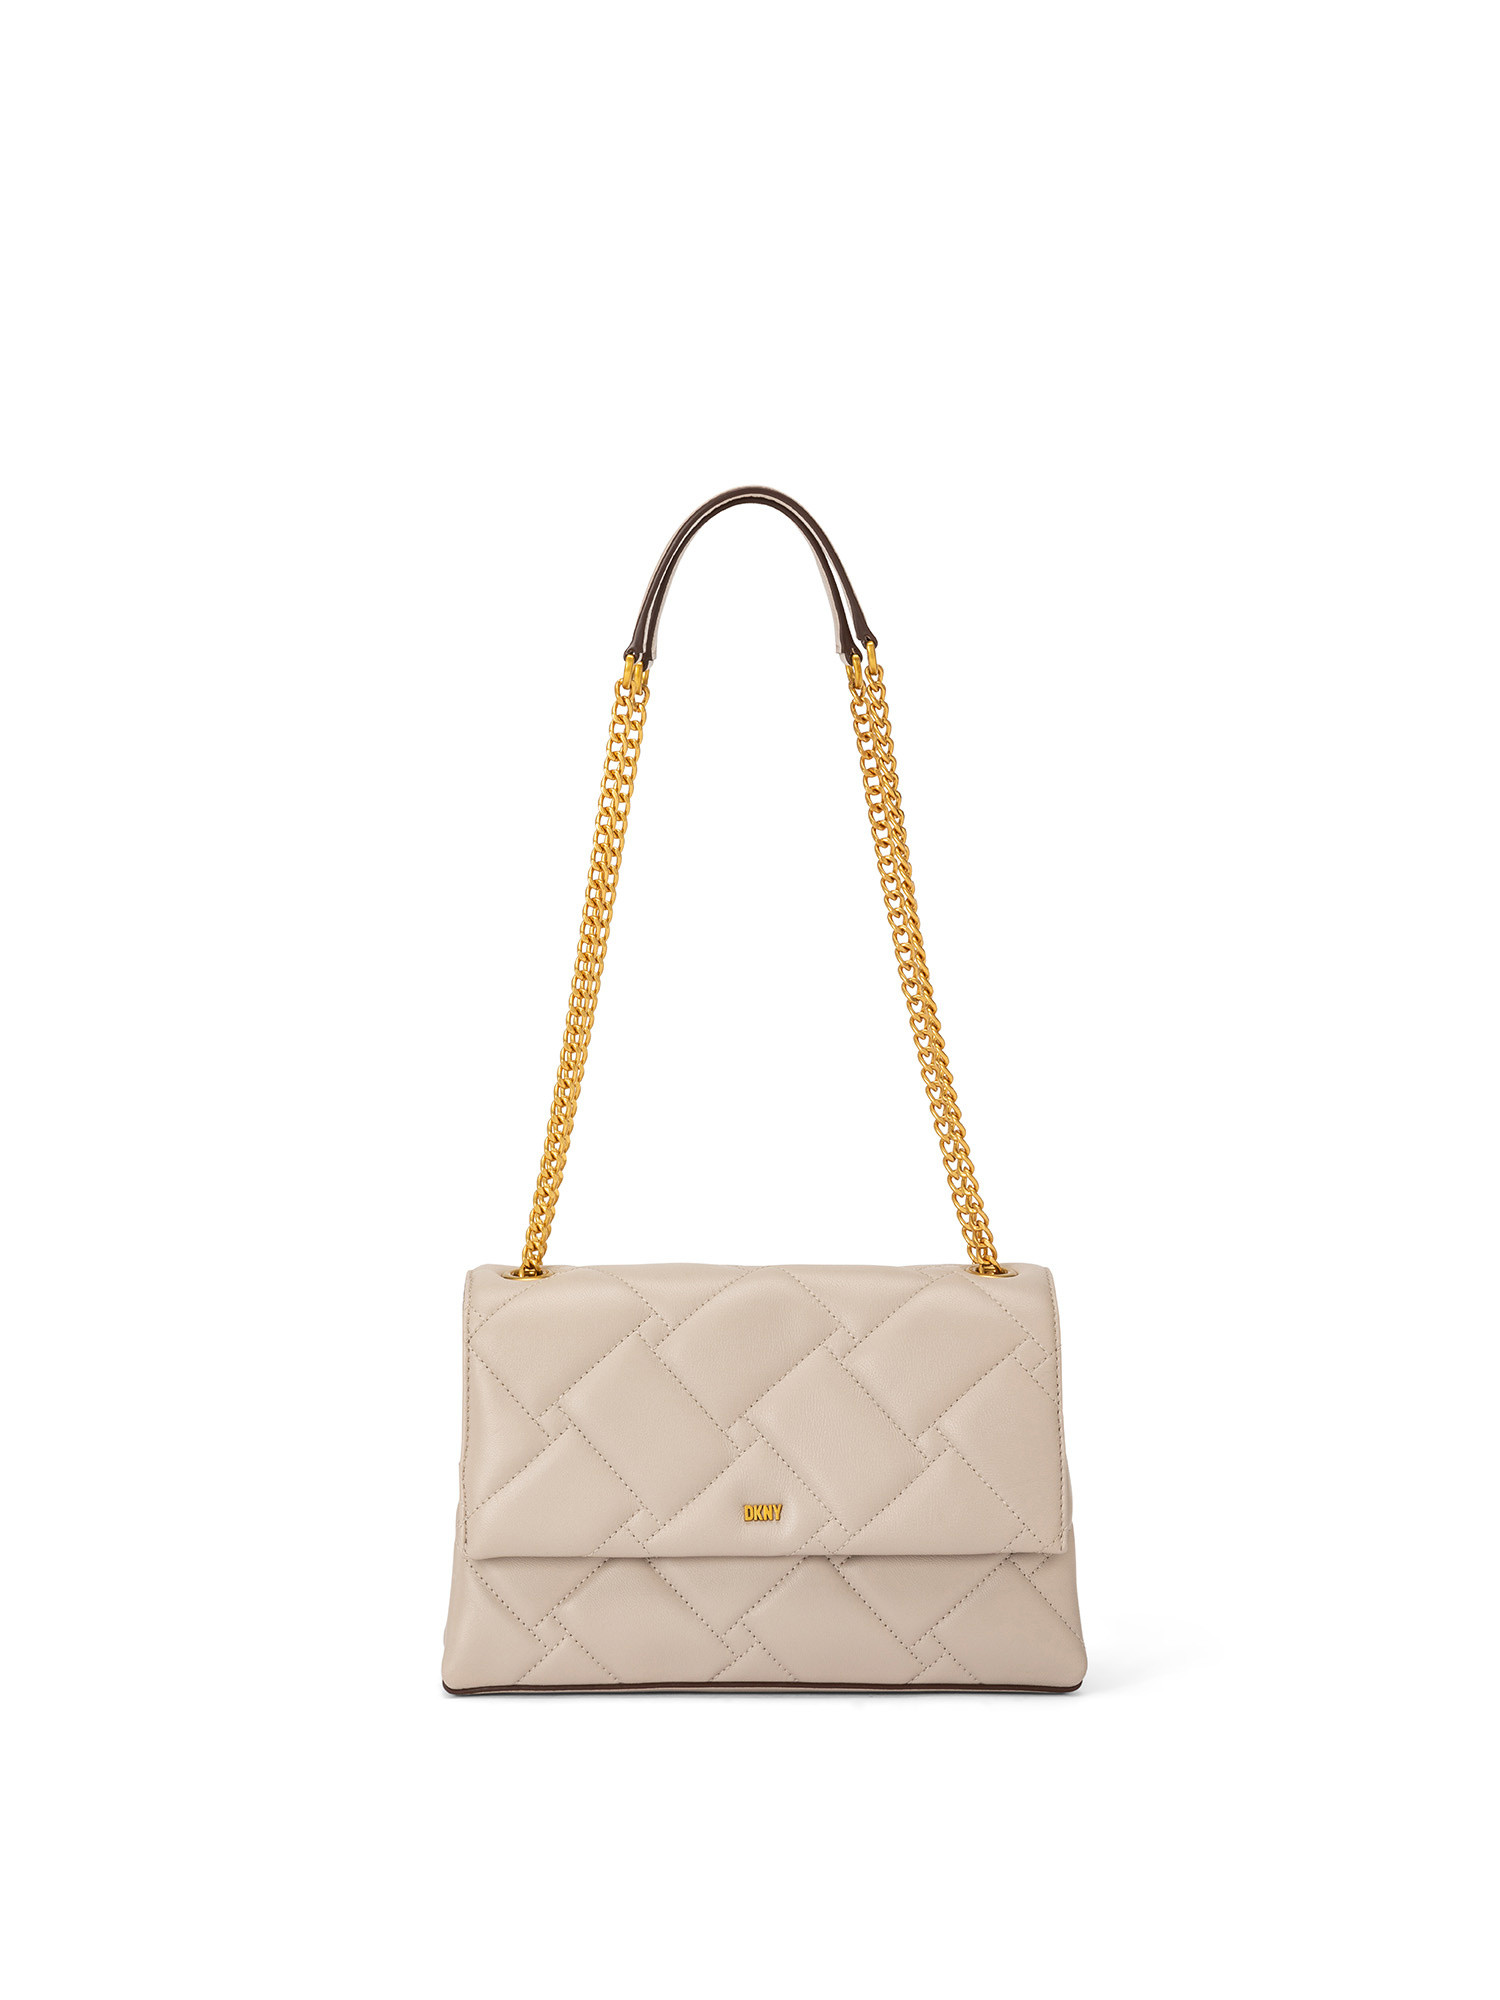 DKNY - Borsa a tracolla Willow, Beige, large image number 0